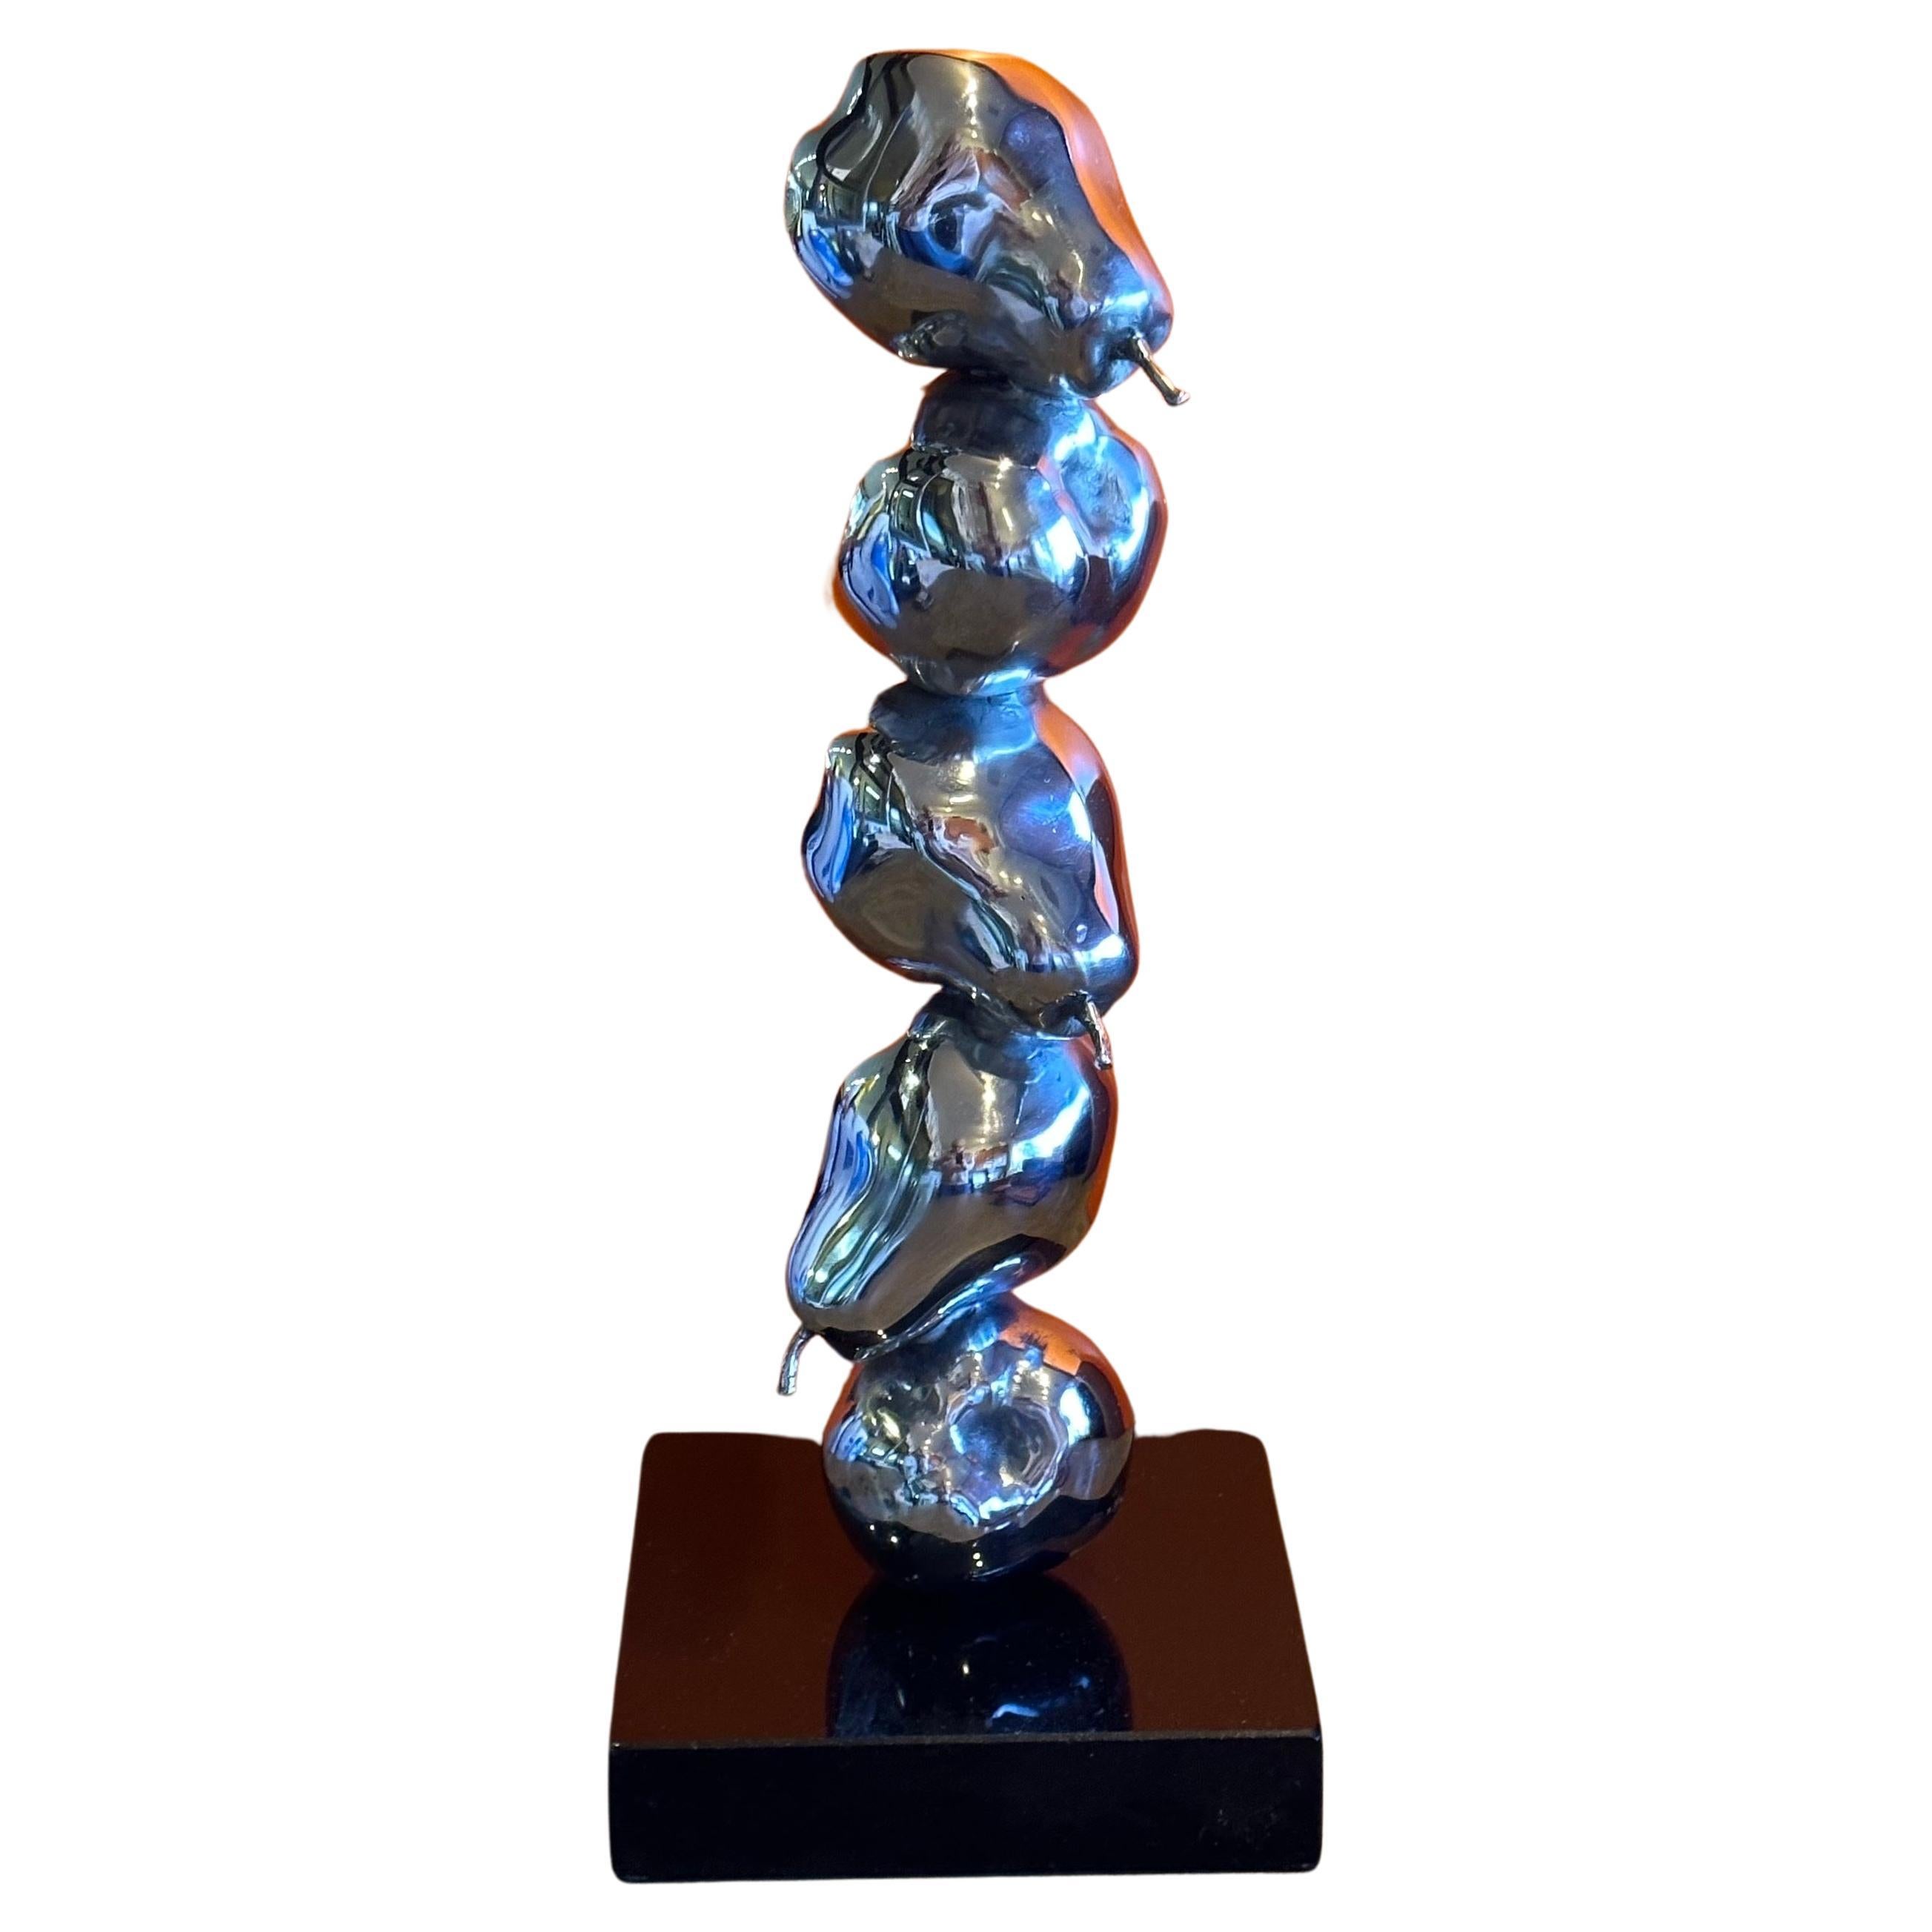 Modernist chrome on black marble stacked pears sculpture, circa 1980s. 
The piece is very well crafted and in excellent vintage condition with no chips or cracks; it measures 6